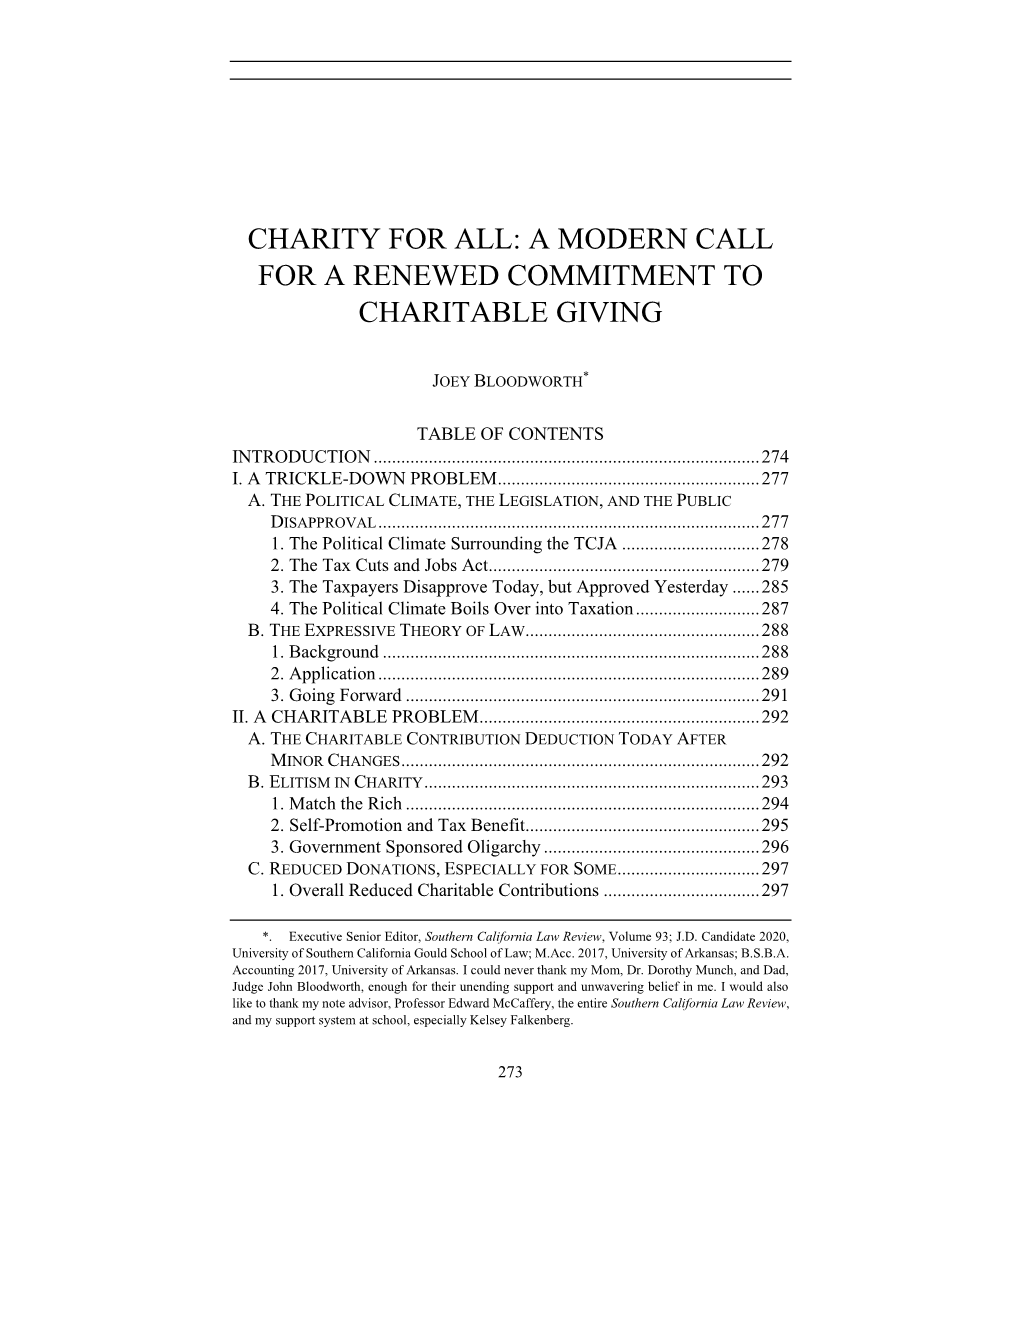 Charity for All: a Modern Call for a Renewed Commitment to Charitable Giving